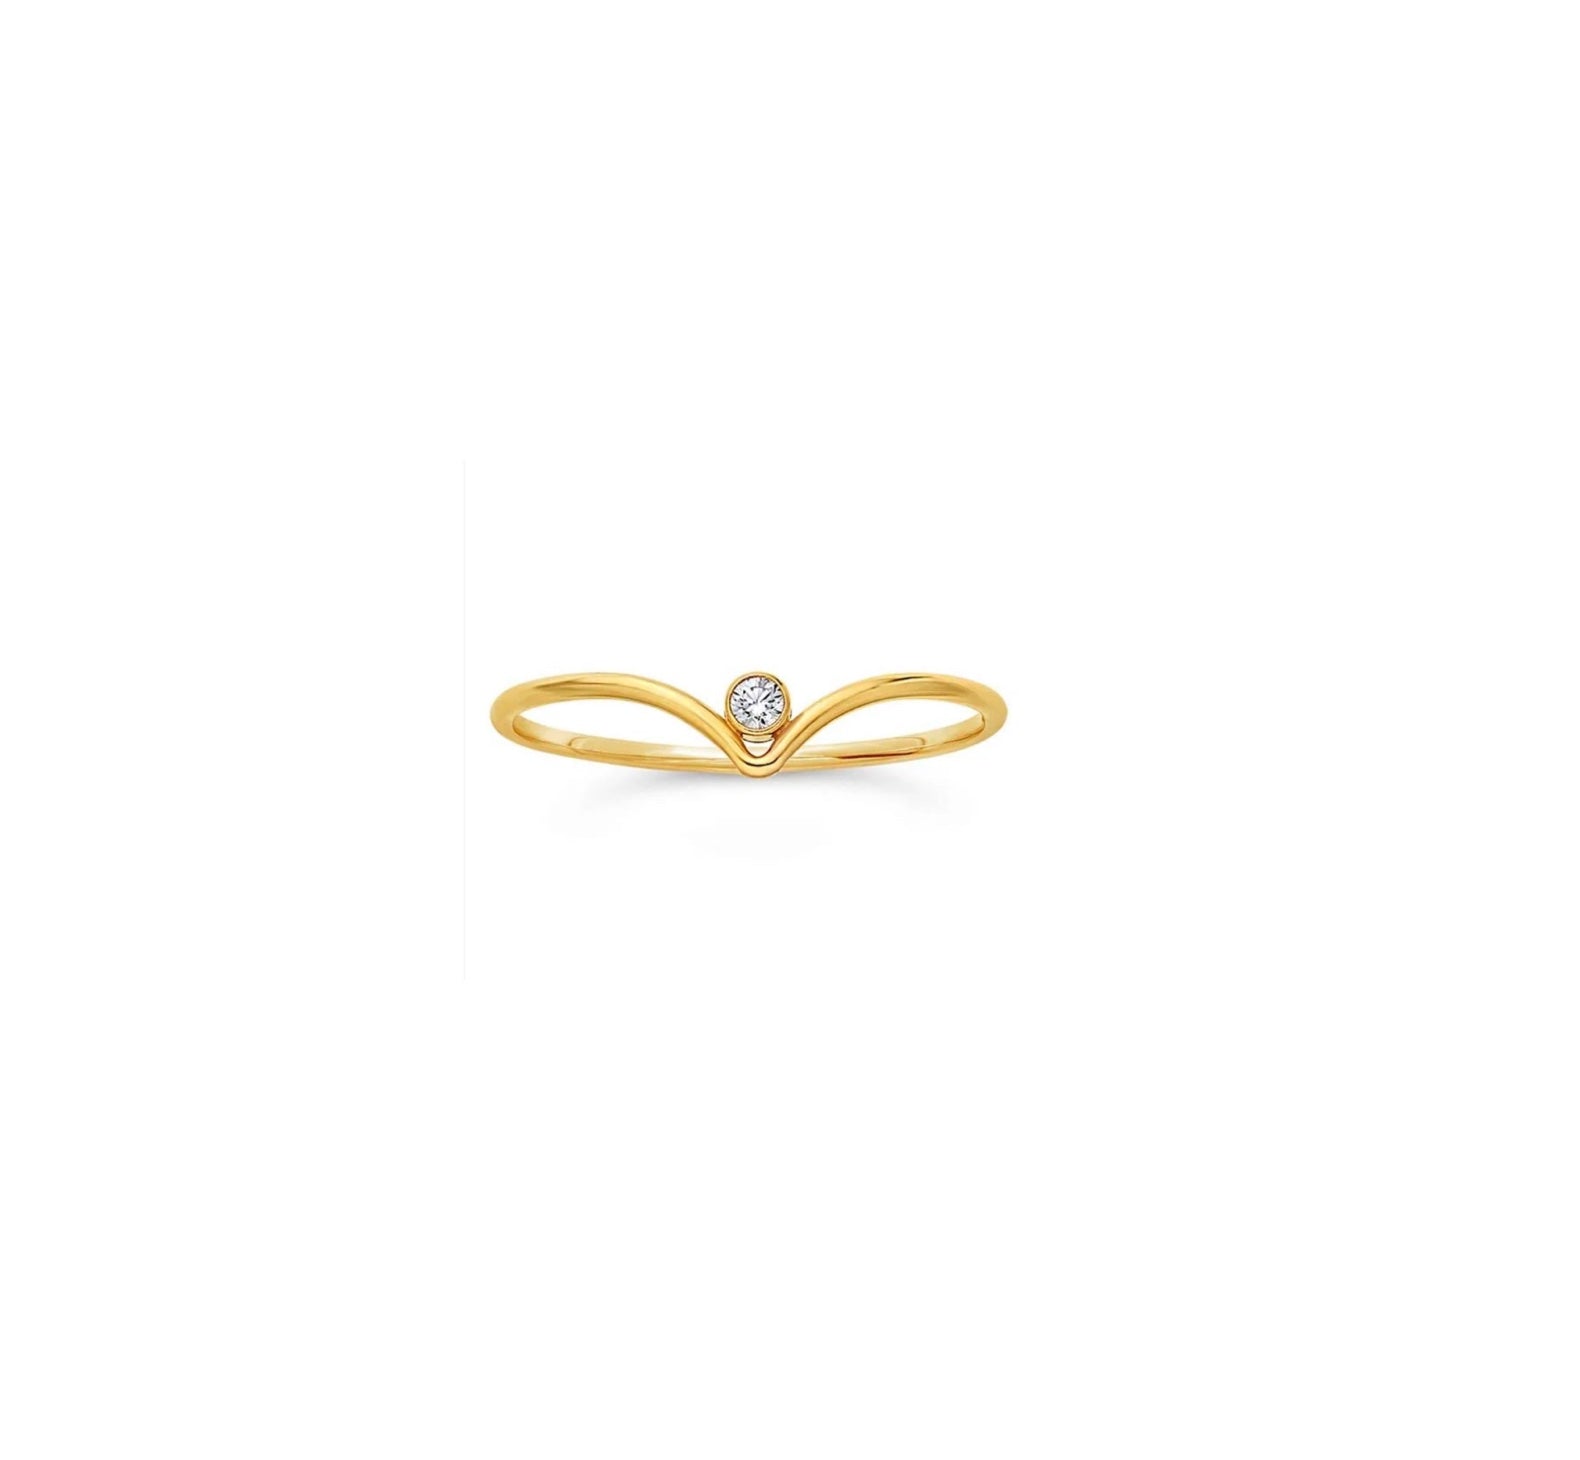 Chevron gold filled dainty ring on white background - Camille Jewelry